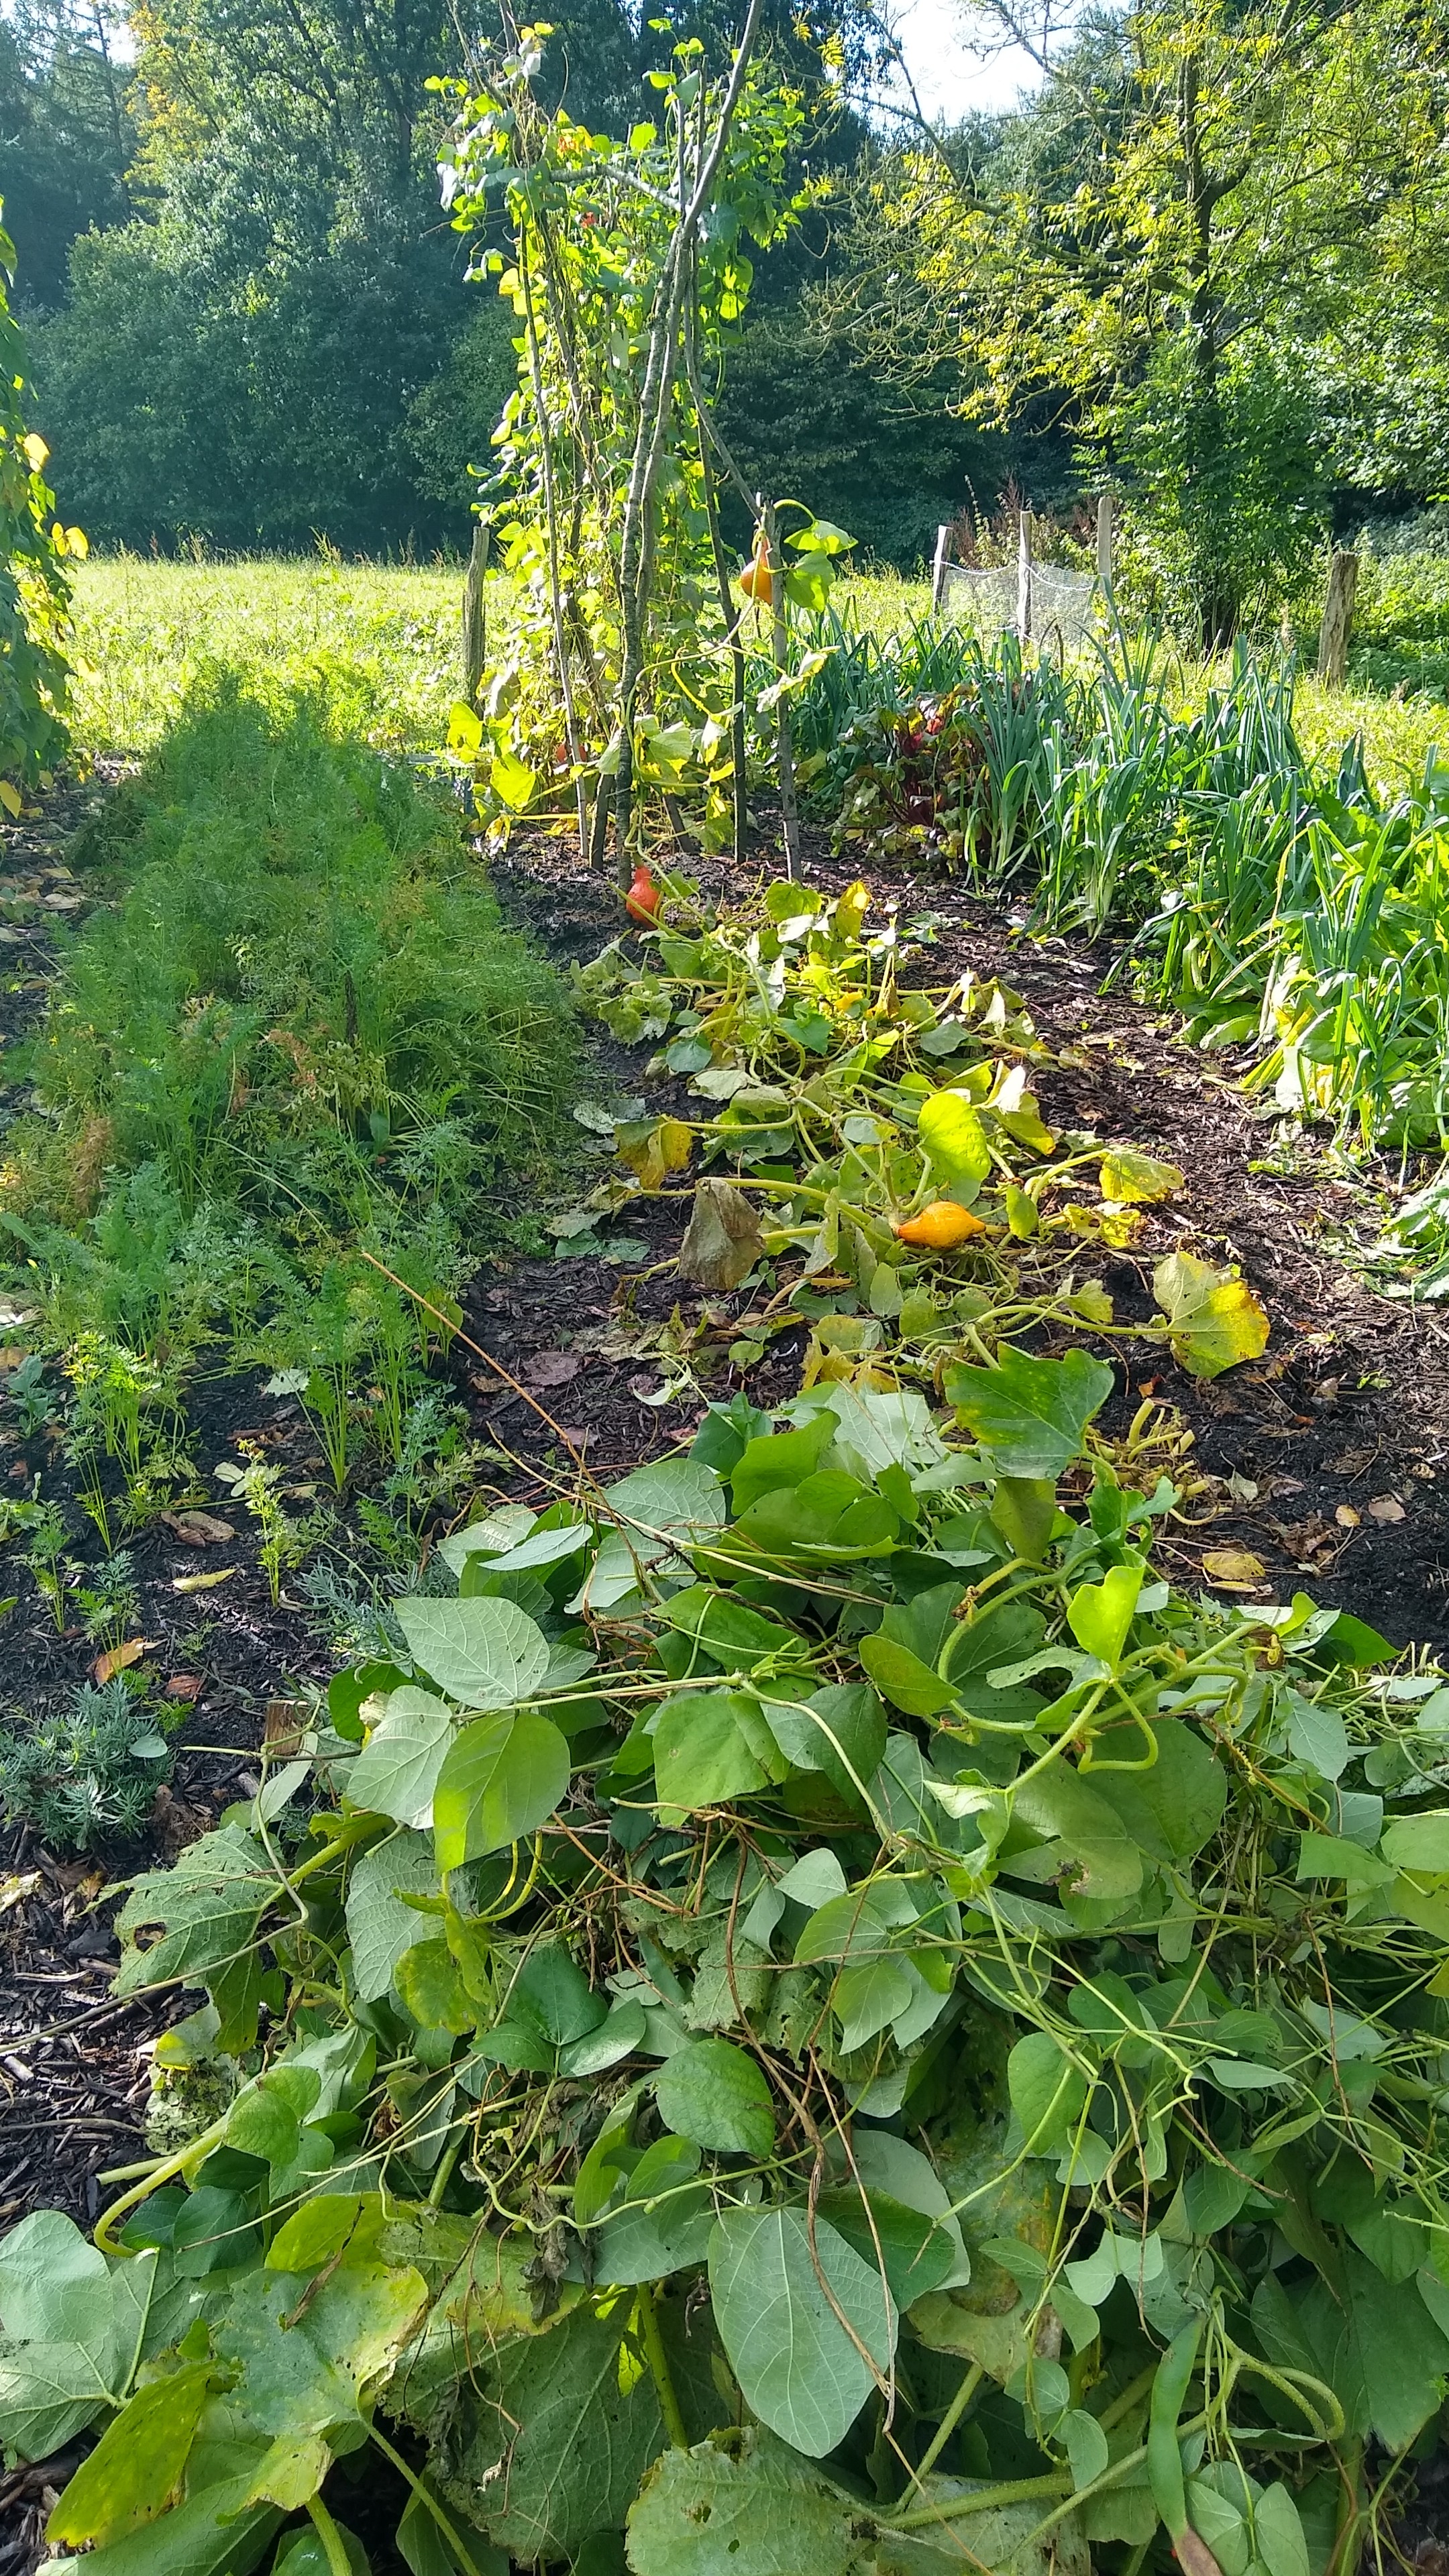 a heap of foliage from runner beans in the foreground. In the background, a partly cleared bed with some tripods left and some pumpkin plants on the ground